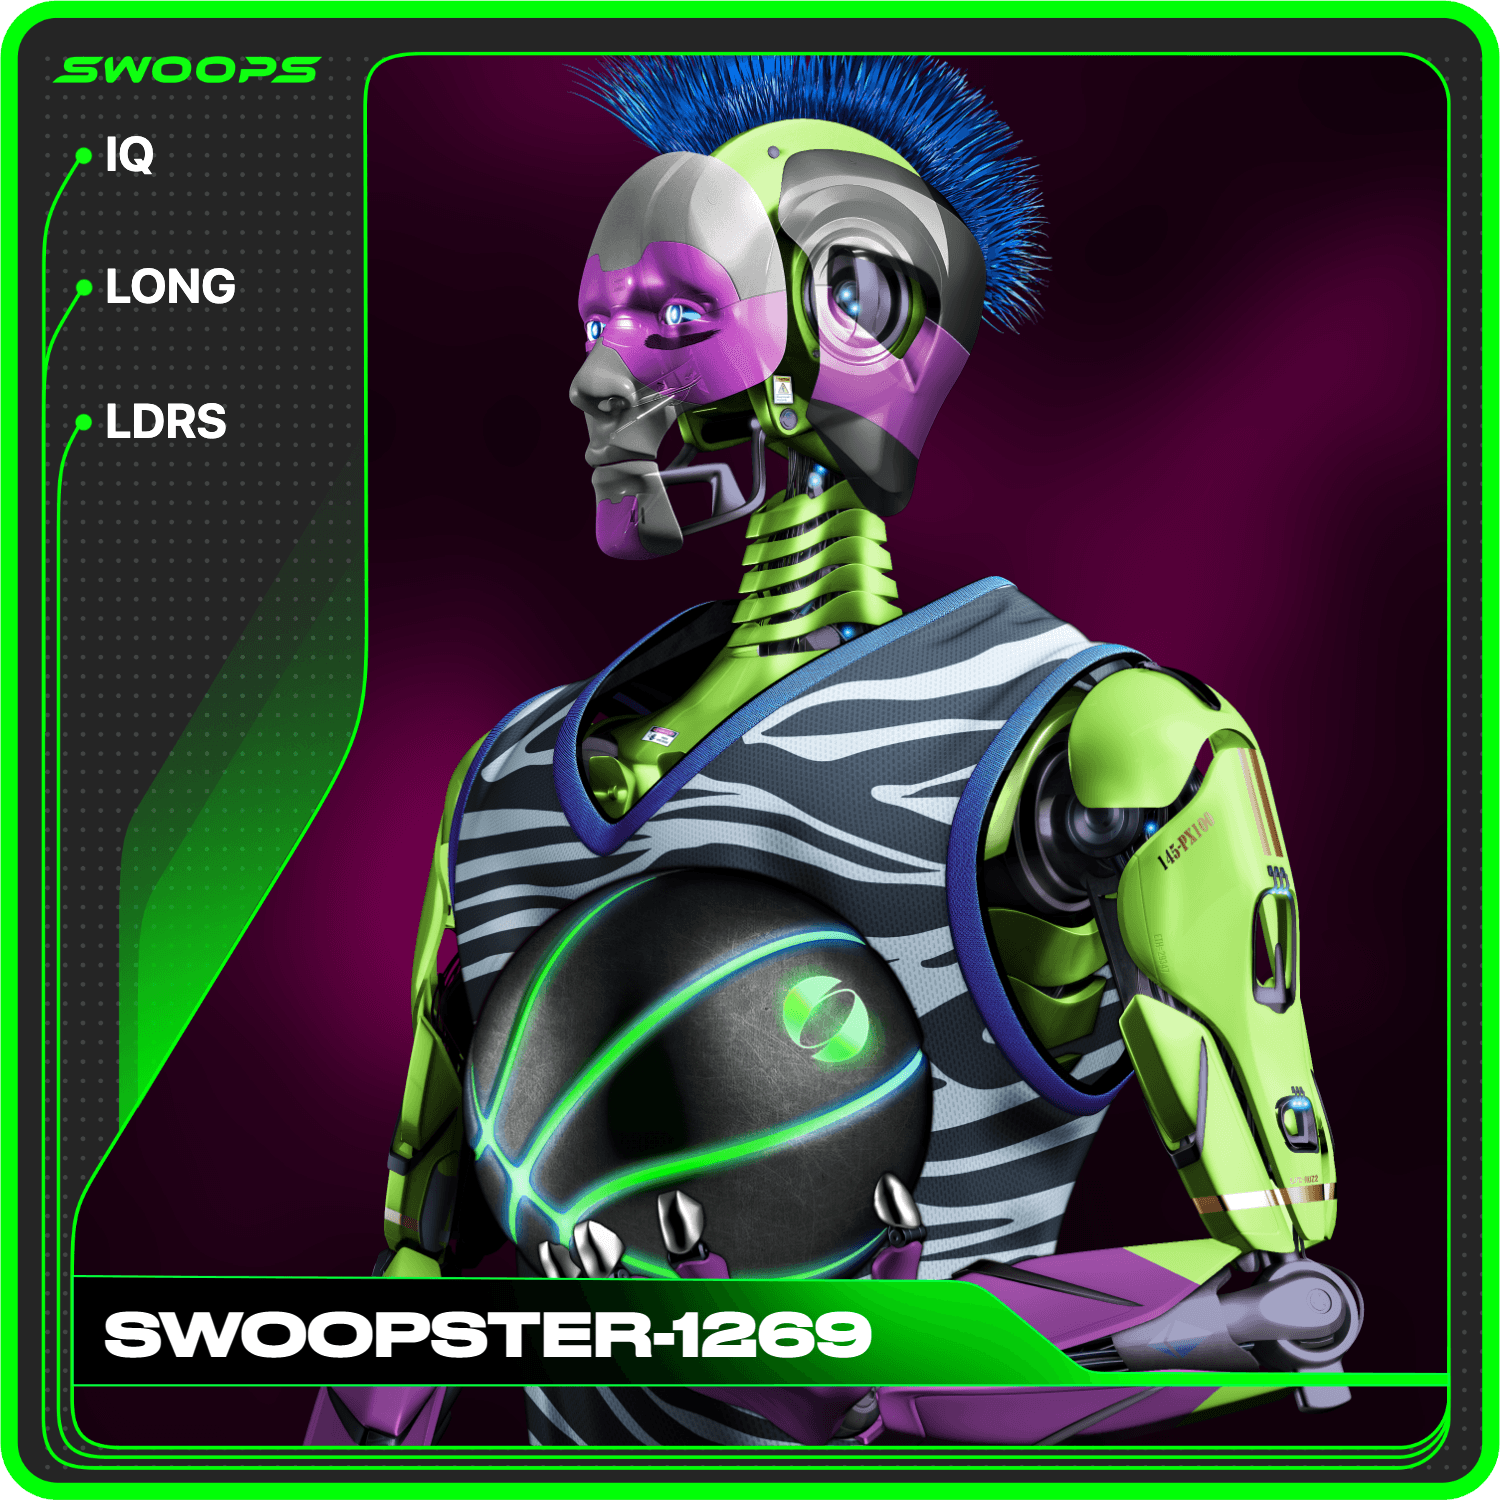 SWOOPSTER-1269